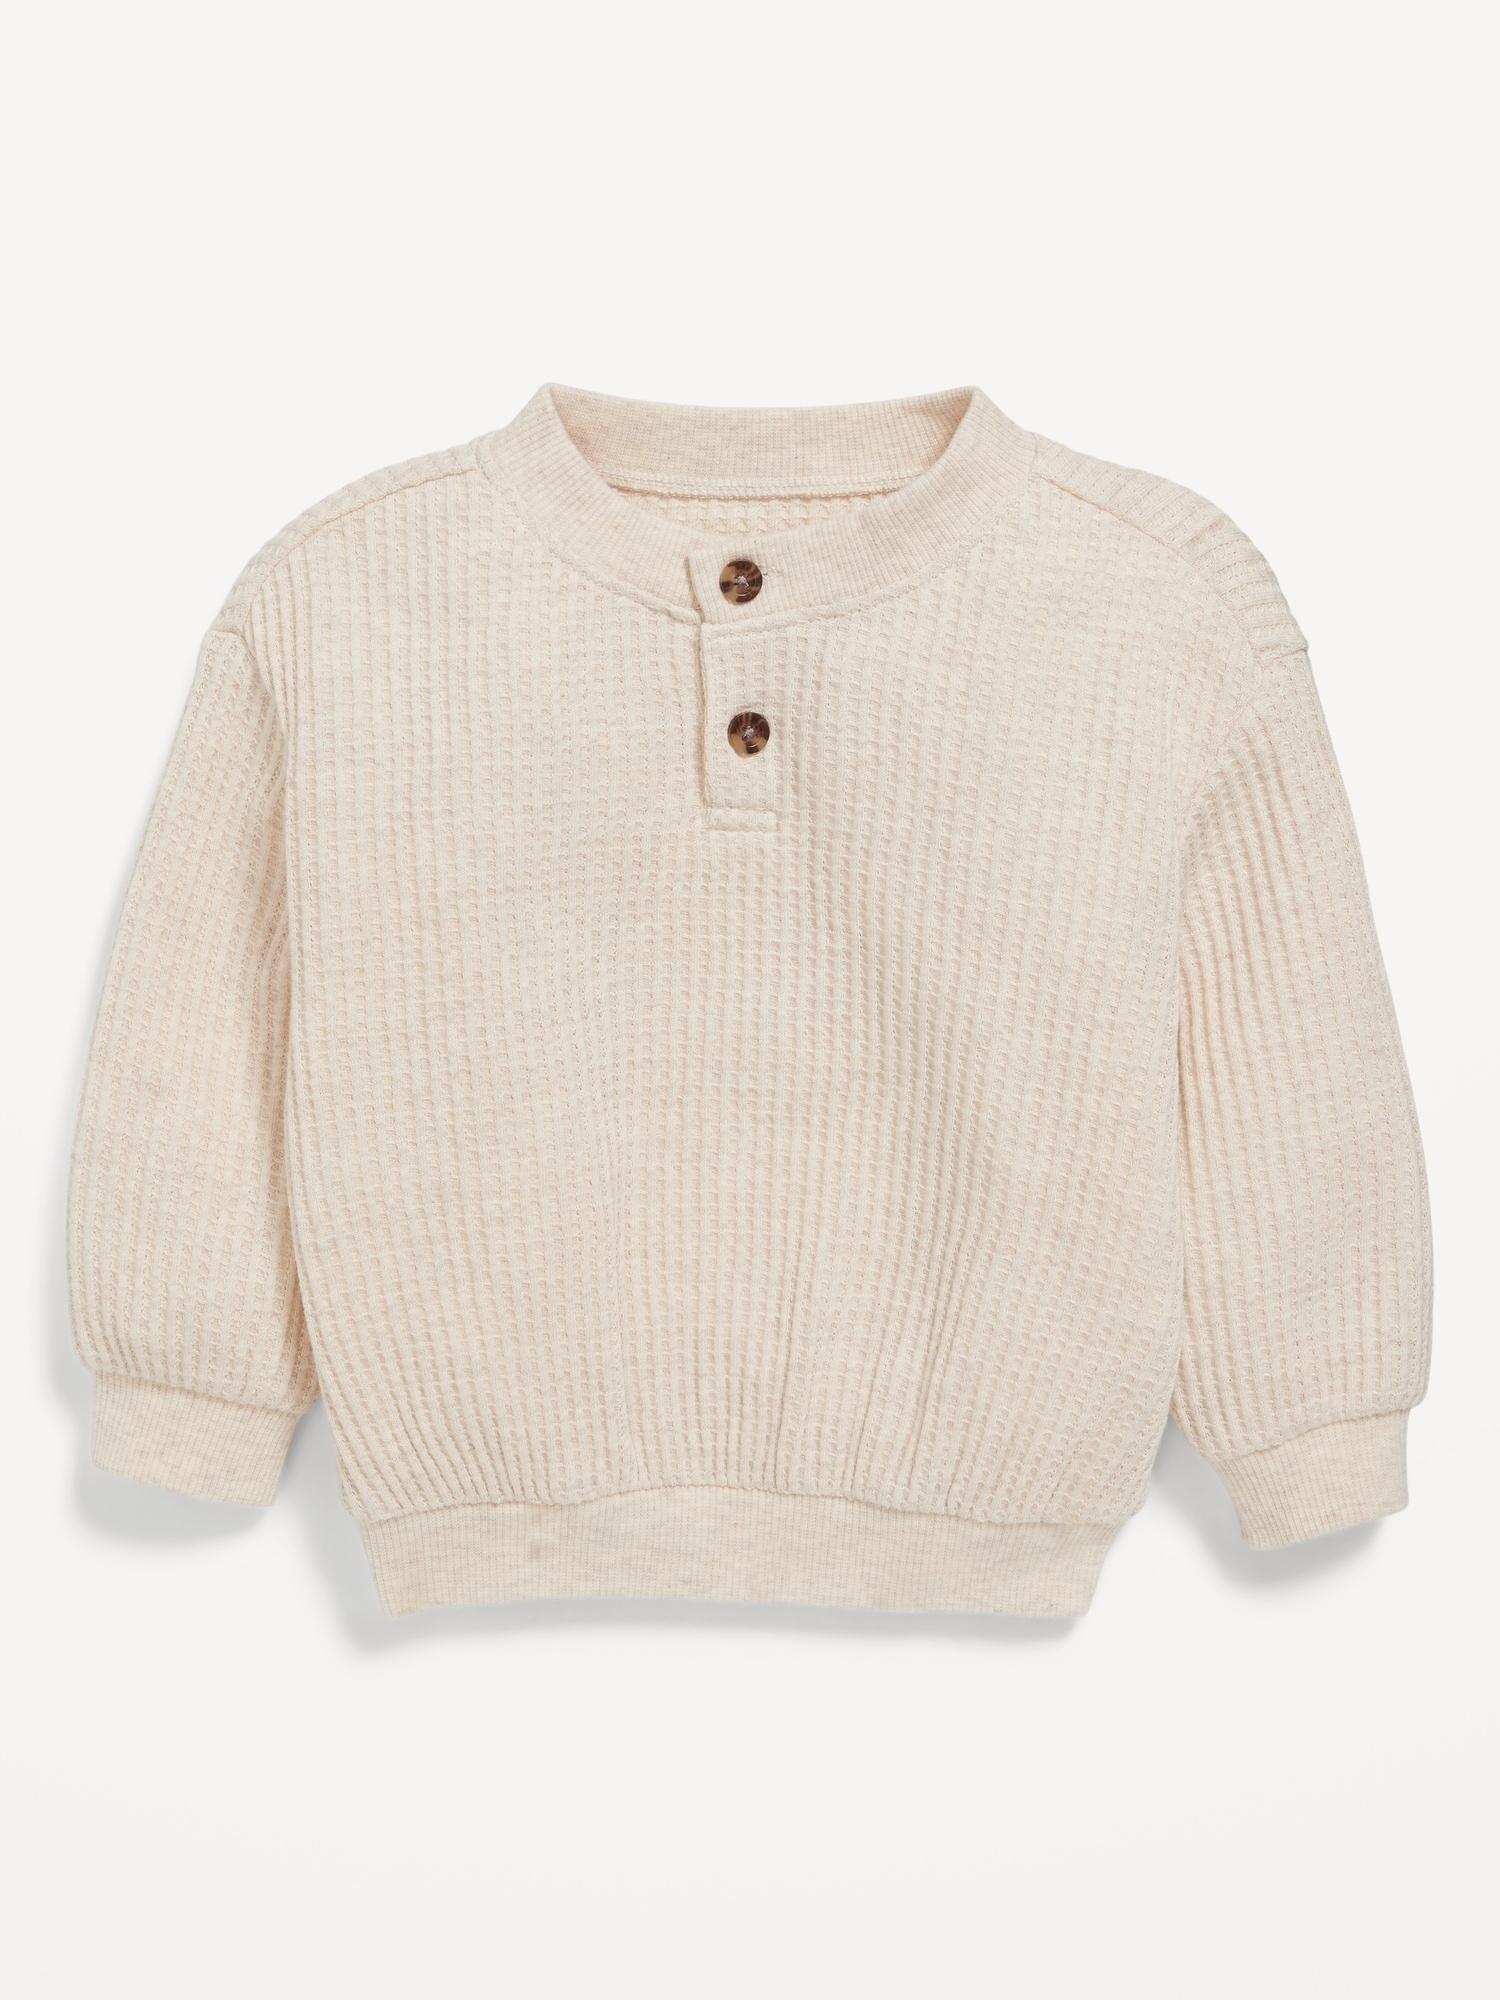 Unisex Thermal-Knit Henley Crew-Neck Sweatshirt for Baby | Old Navy